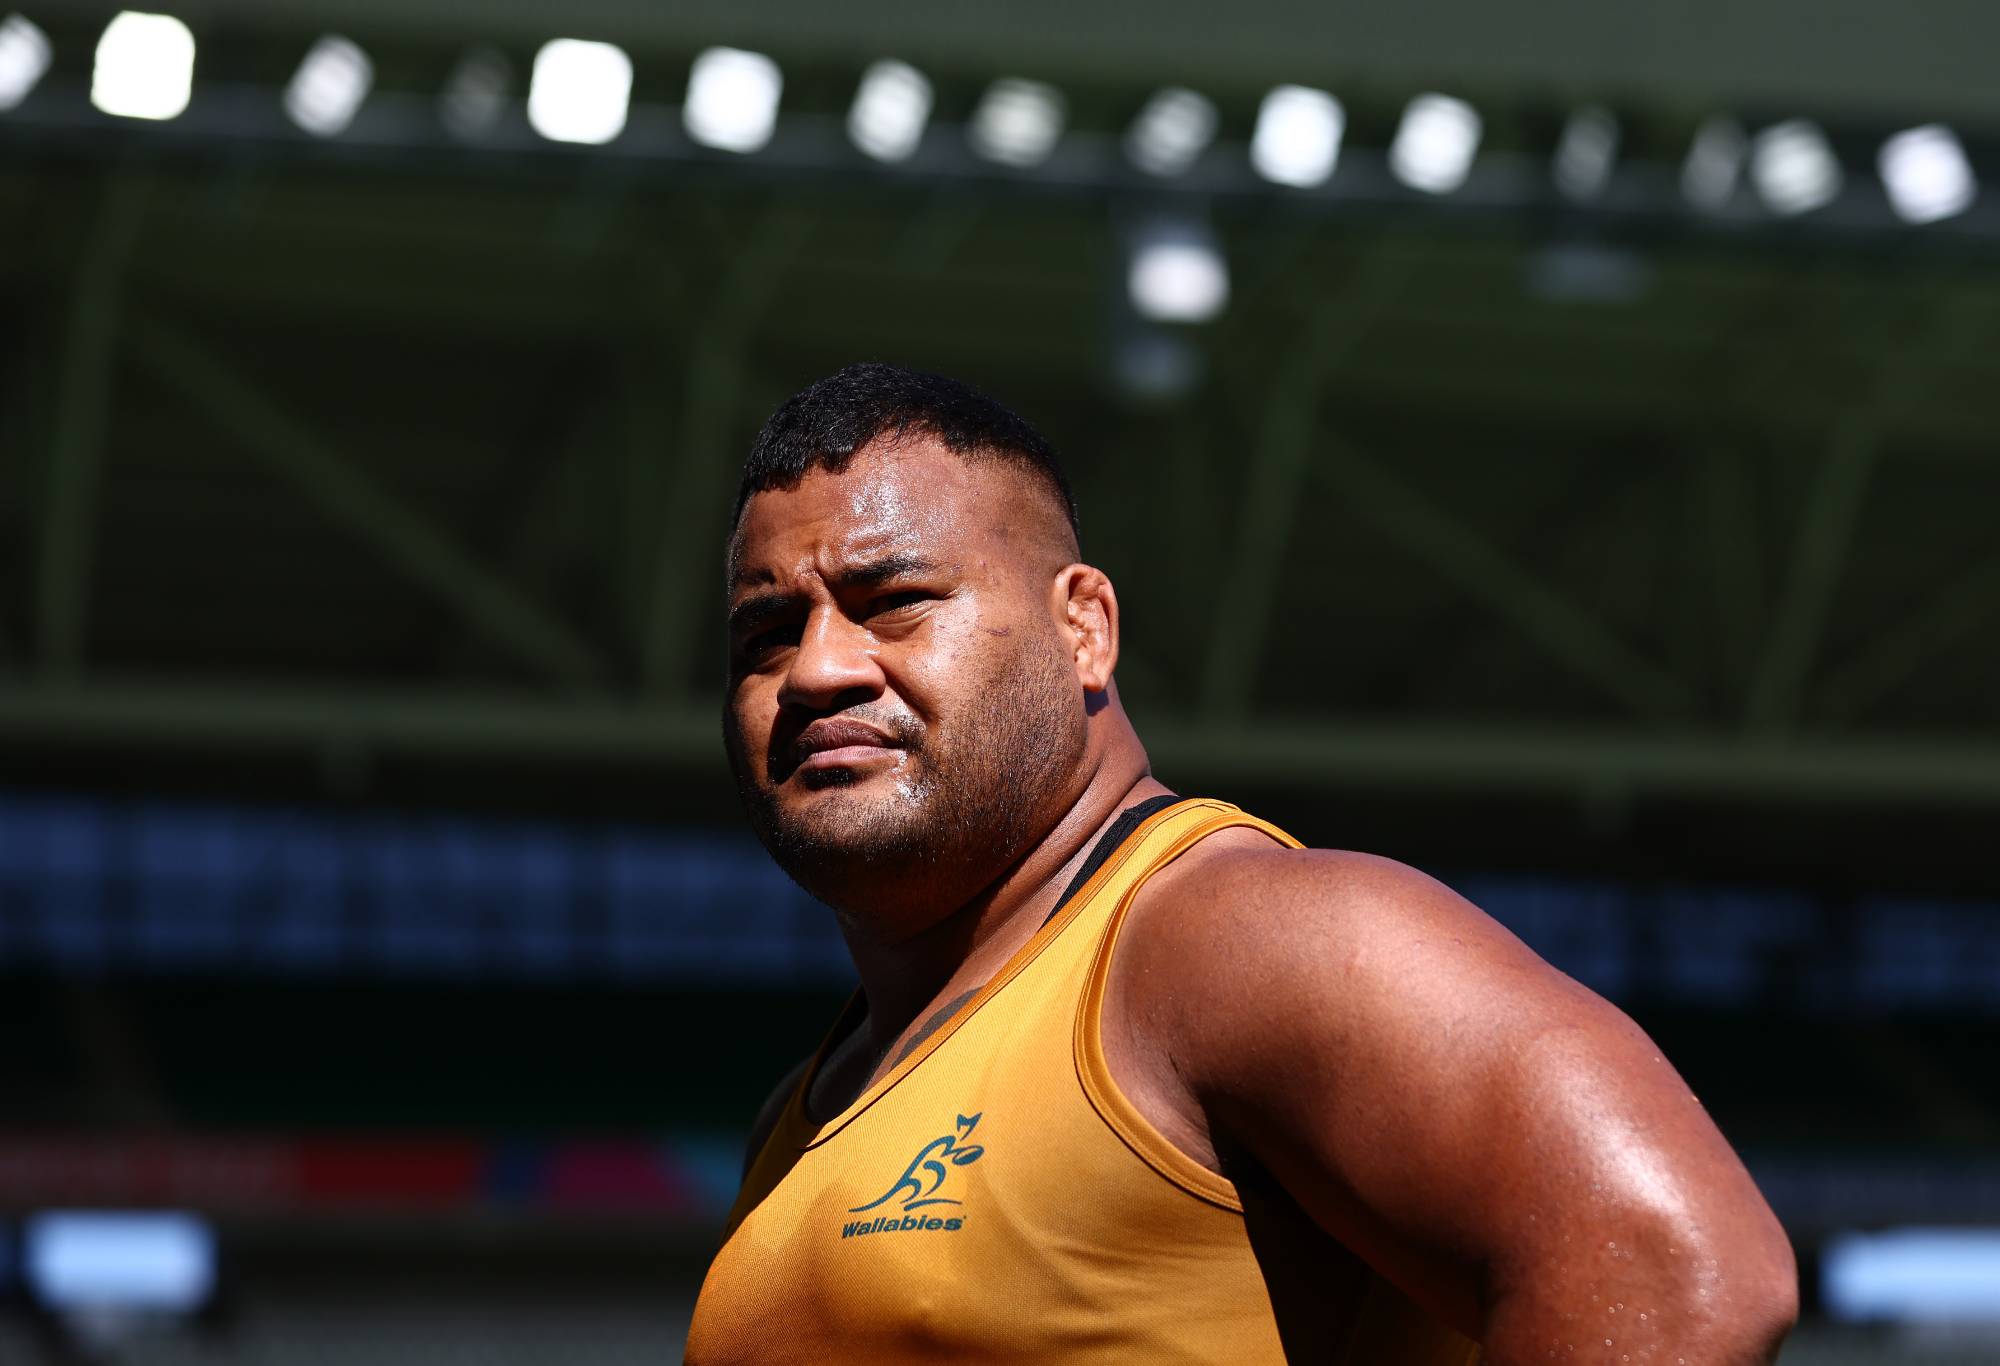 Taniela Tupou of the Wallabies looks on ahead of their Rugby World Cup France 2023 match against Fiji at Stade Geoffroy-Guichard on September 16, 2023 in Saint-Etienne, France. (Photo by Chris Hyde/Getty Images)